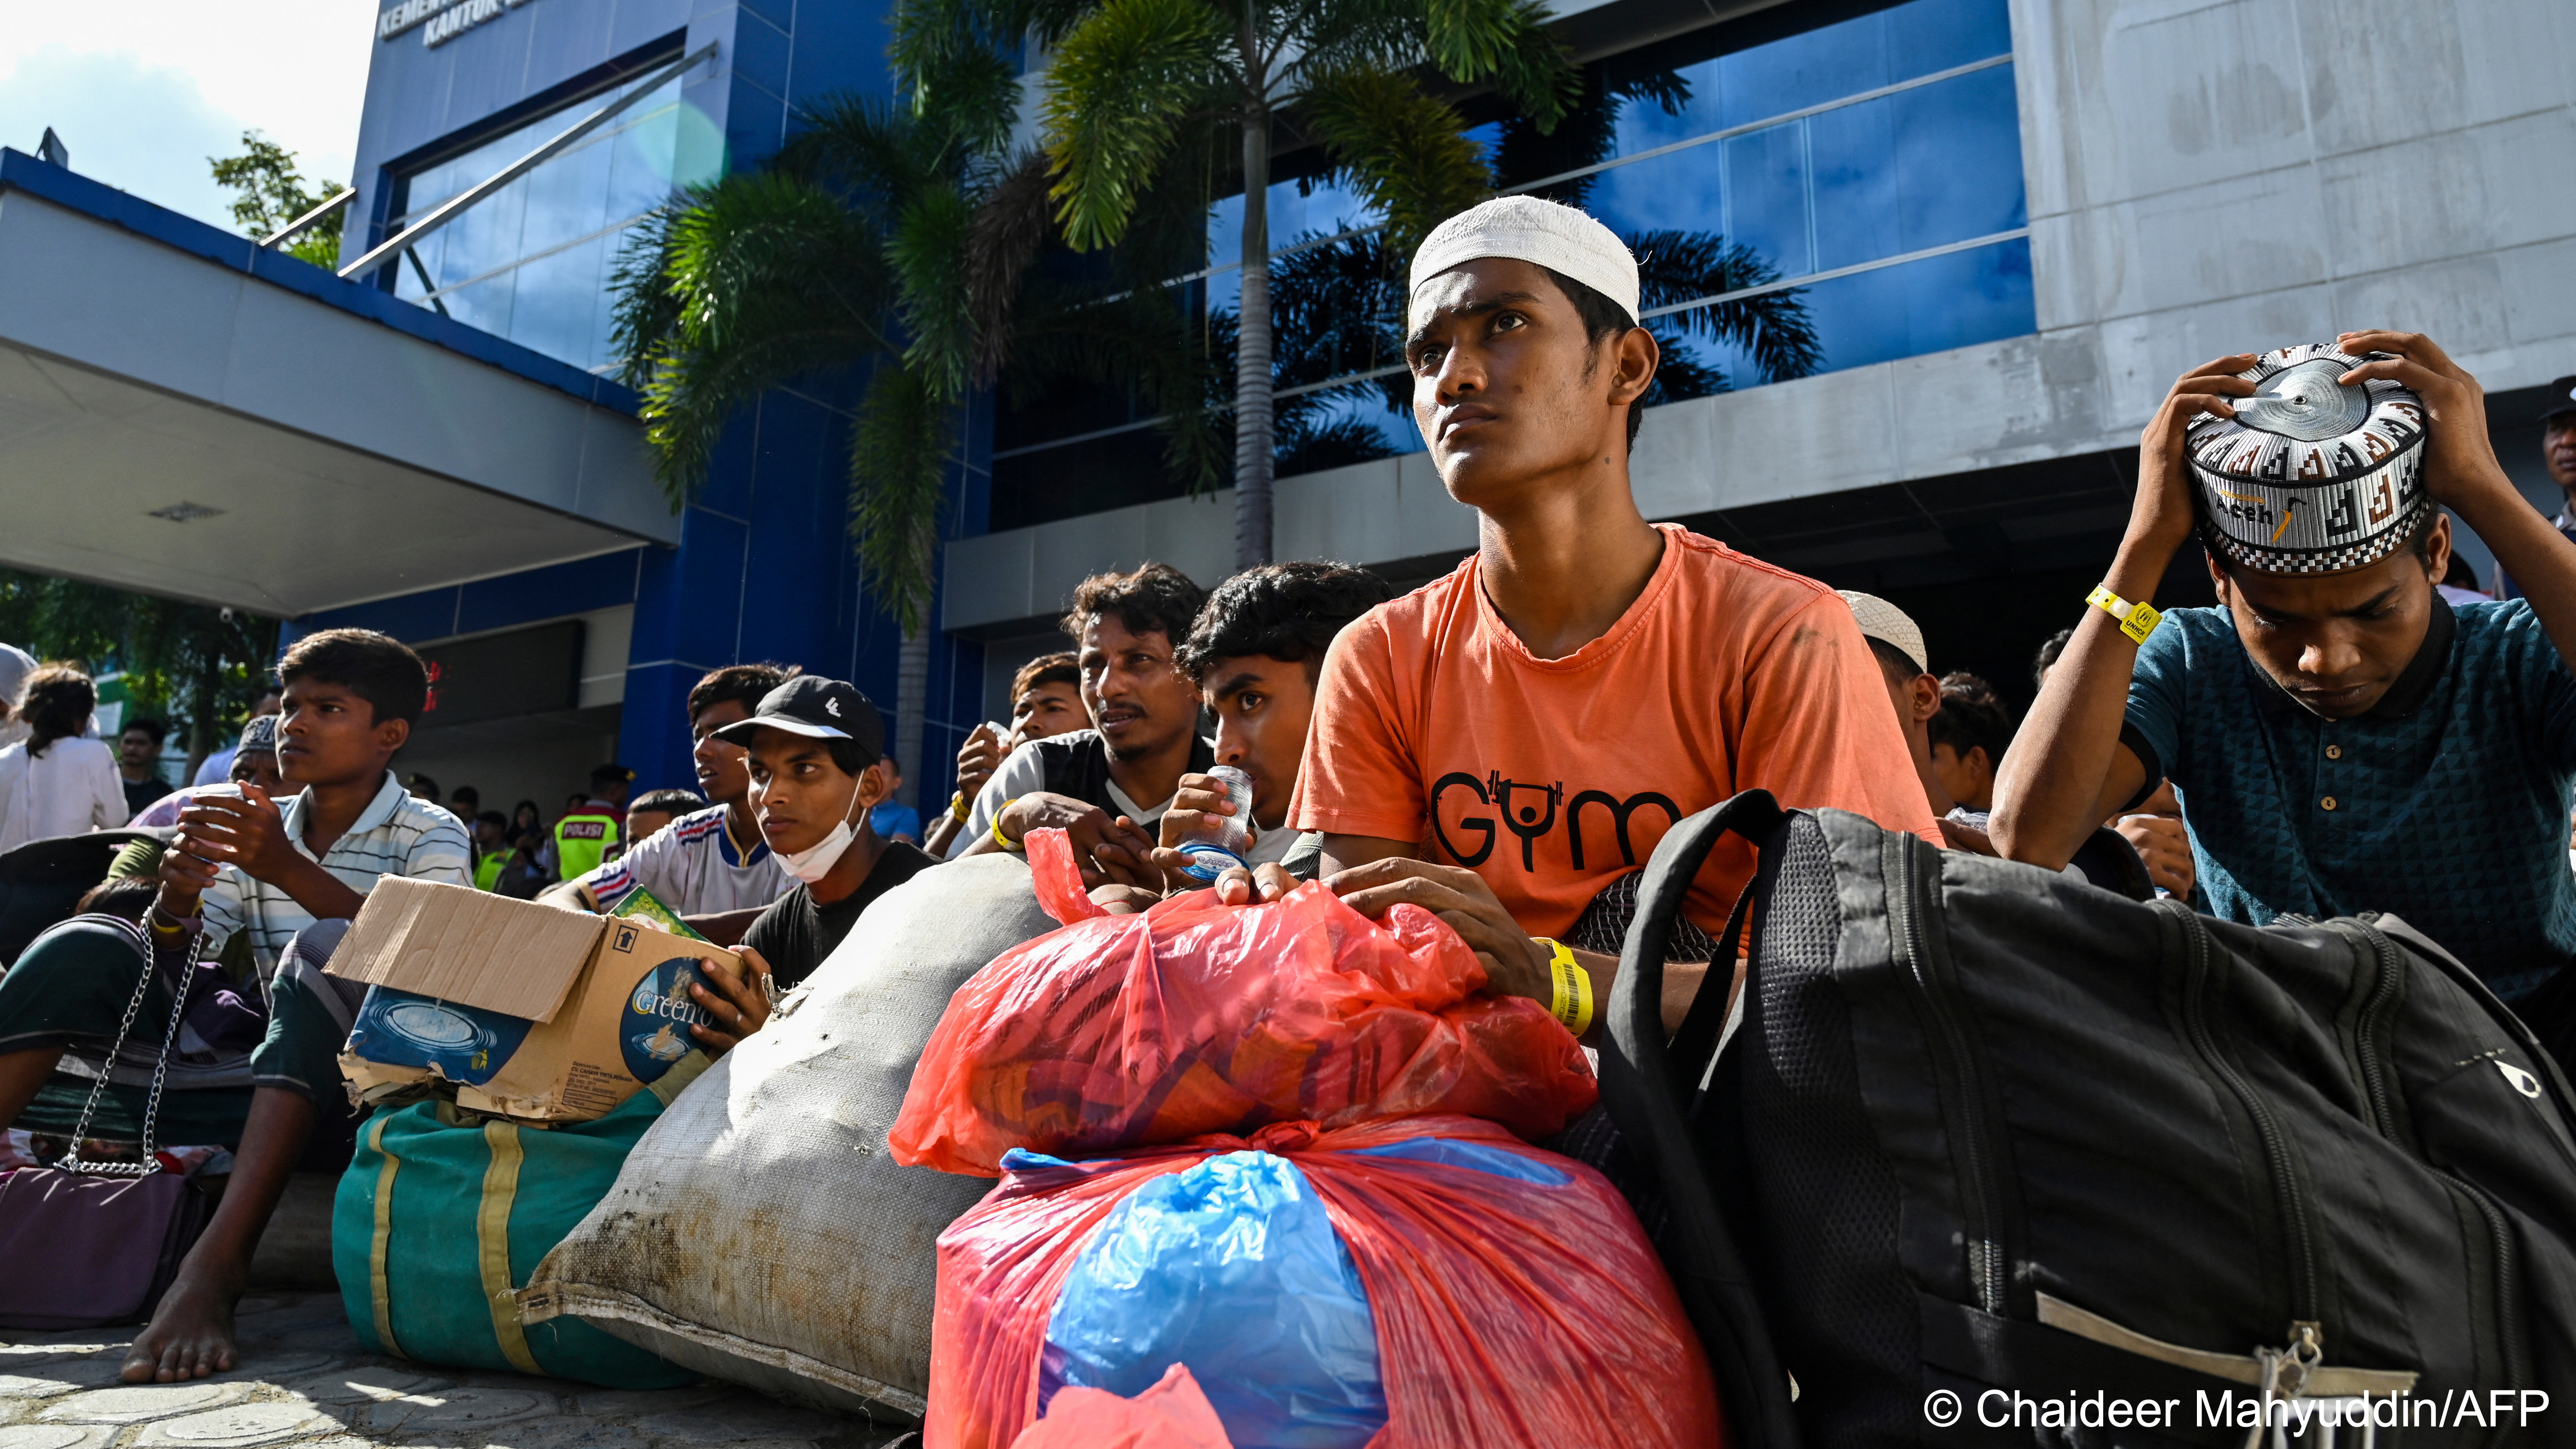 Rohingya refugees sit on the ground with bags of belongings in front of a government building, Banda Aceh, Indonesia, 27 December 2023